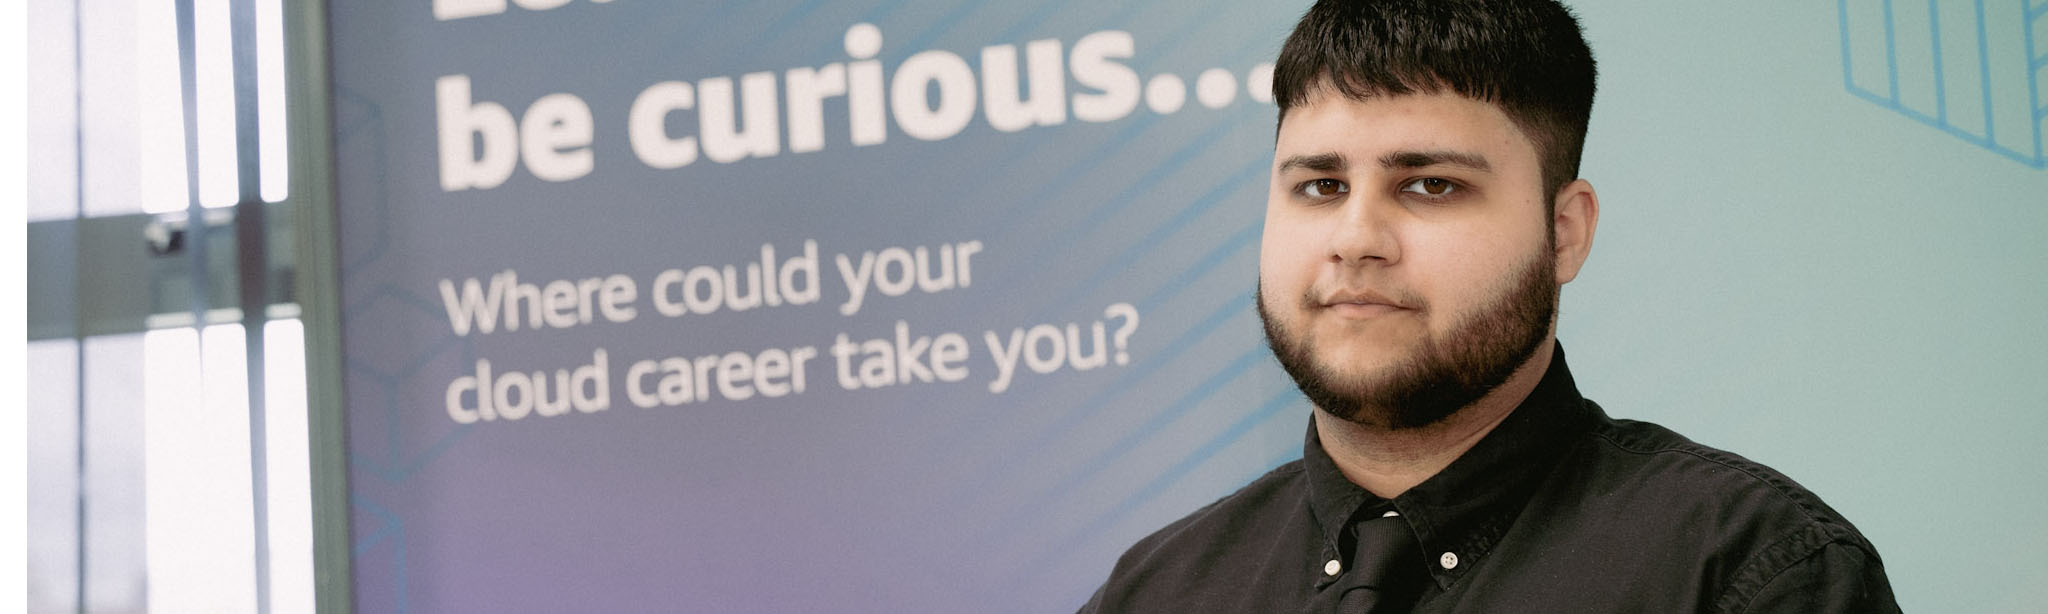 Mohammed secures a Capgemini role